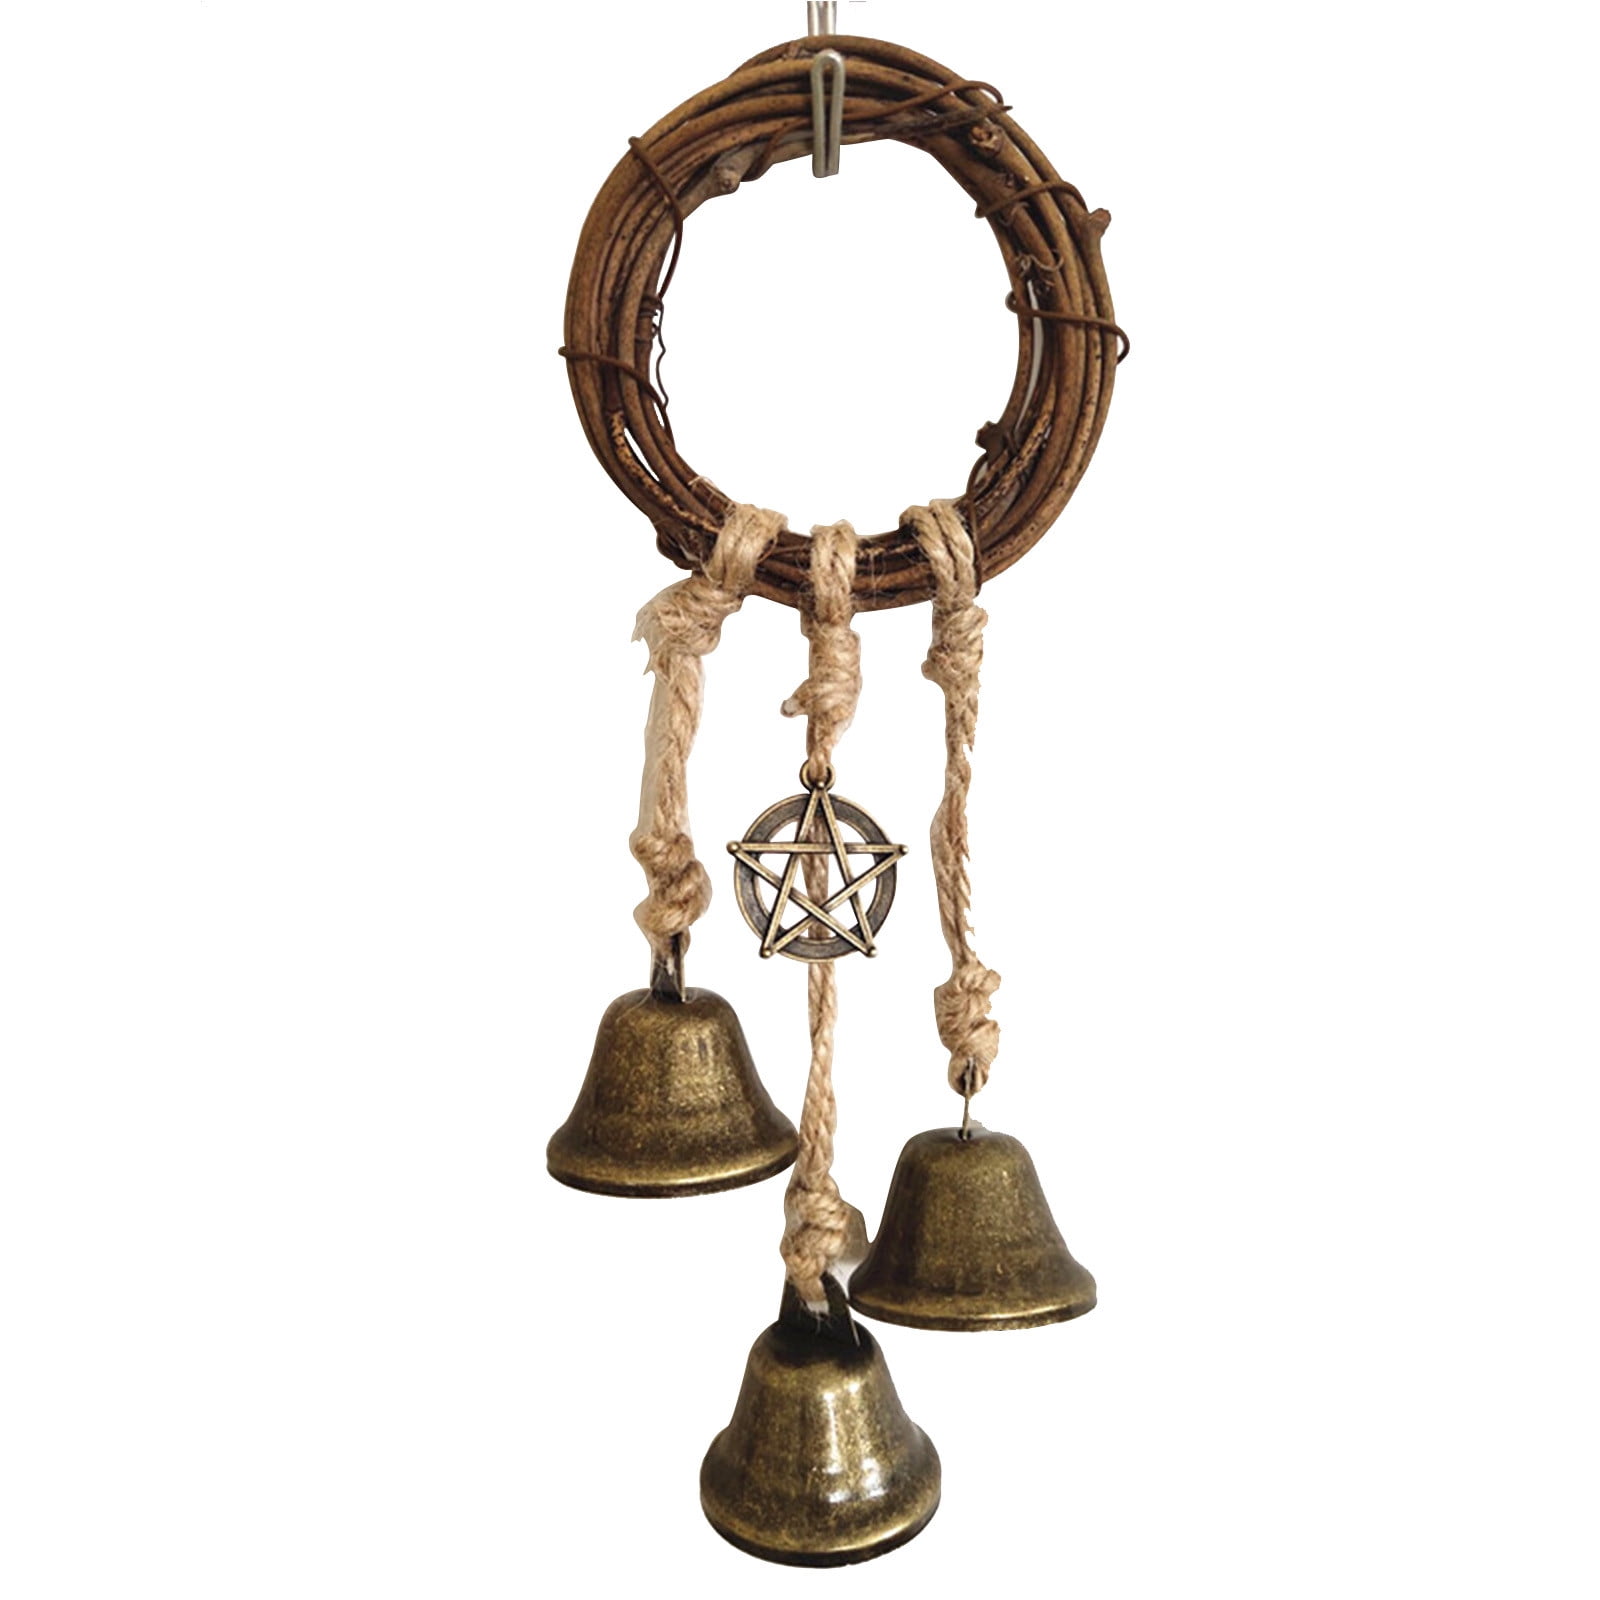 Set of 2 Brass Wall Hanging Bells Home Temple 3 x 4 Inch- Chain Length 20  Inch